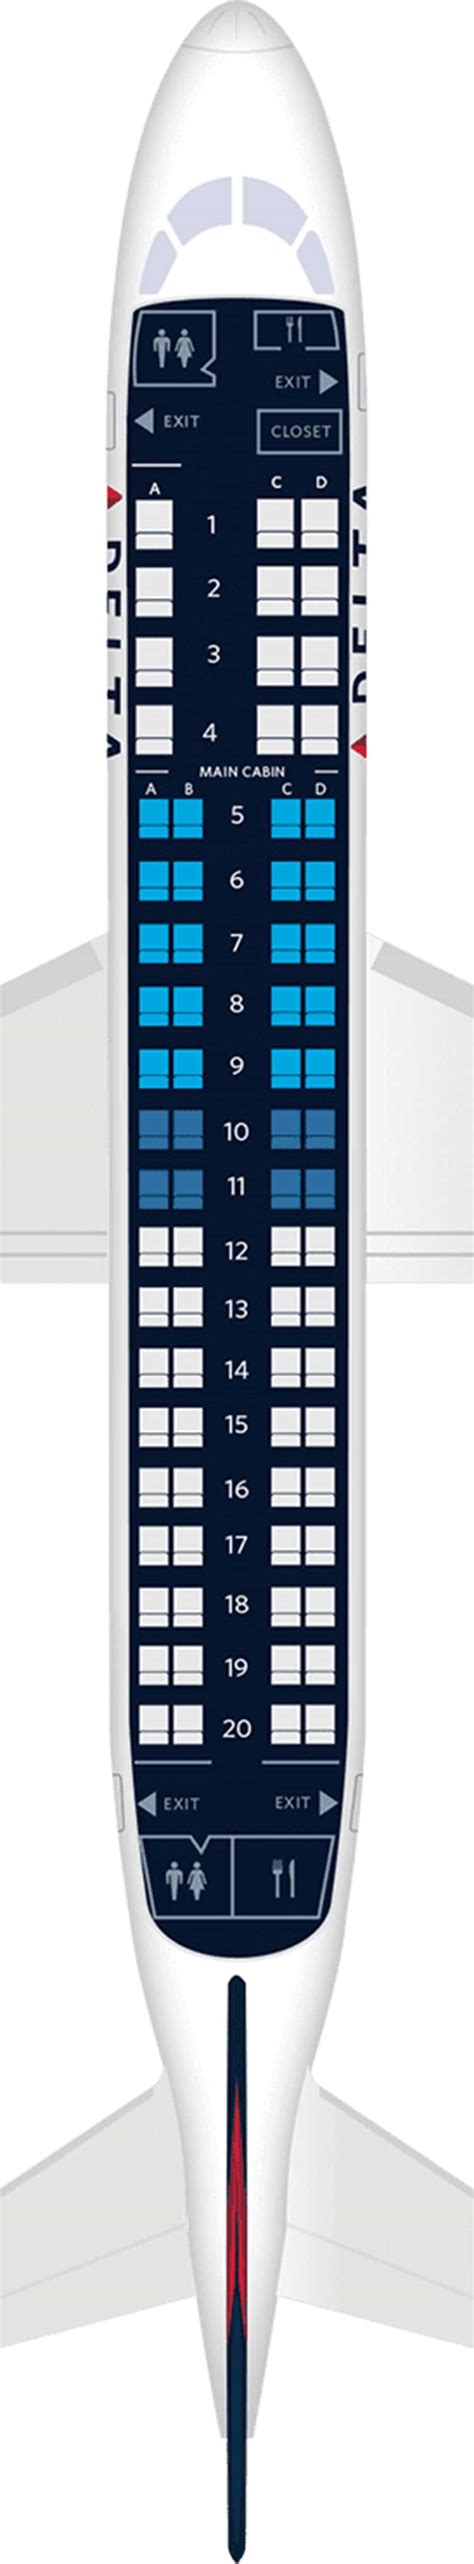 For your next United flight, use this seating chart to get the most comfortable seats, legroom, and recline on . Seat Maps; Airlines; Cheap Flights; Comparison Charts. Short-haul Economy Class ... Embraer ERJ-145 (ERJ) Embraer ERJ-175 (E75) [SkyWest] Saab 340B (SF3) Check-in; Baggage; Infants; Minors; Pets; Seat(s) Class Seat Type Power Video .... 